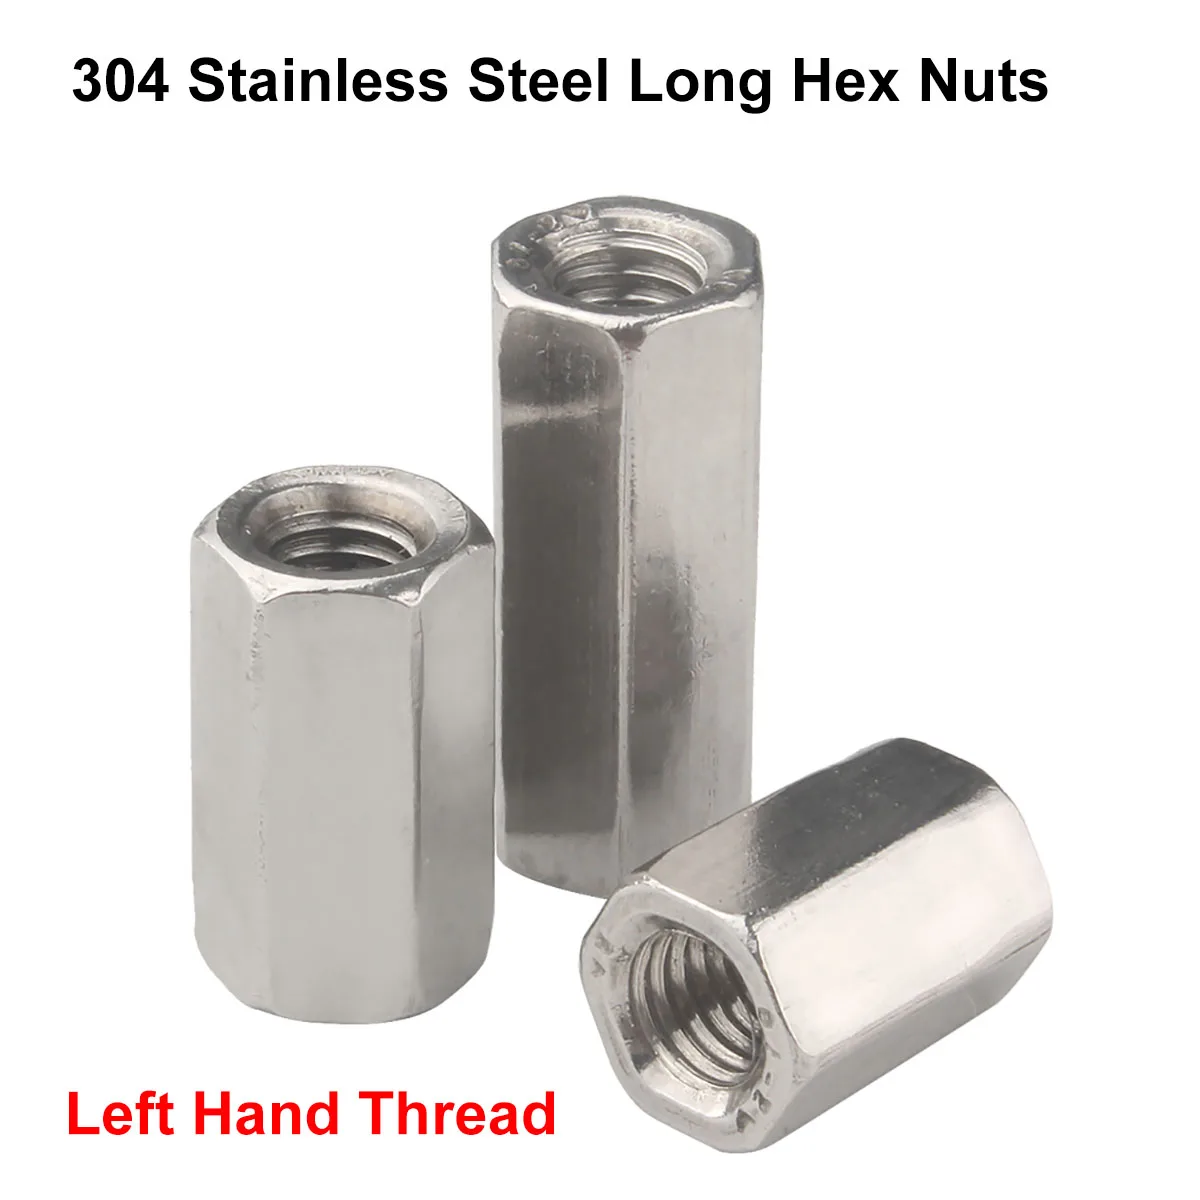 

1Pcs Left Hand Thread 304 Stainless Steel Hex Rod Coupling Nuts Standoff Spacer Long Hex Nut M6 M8 M10 M12 M14 M16